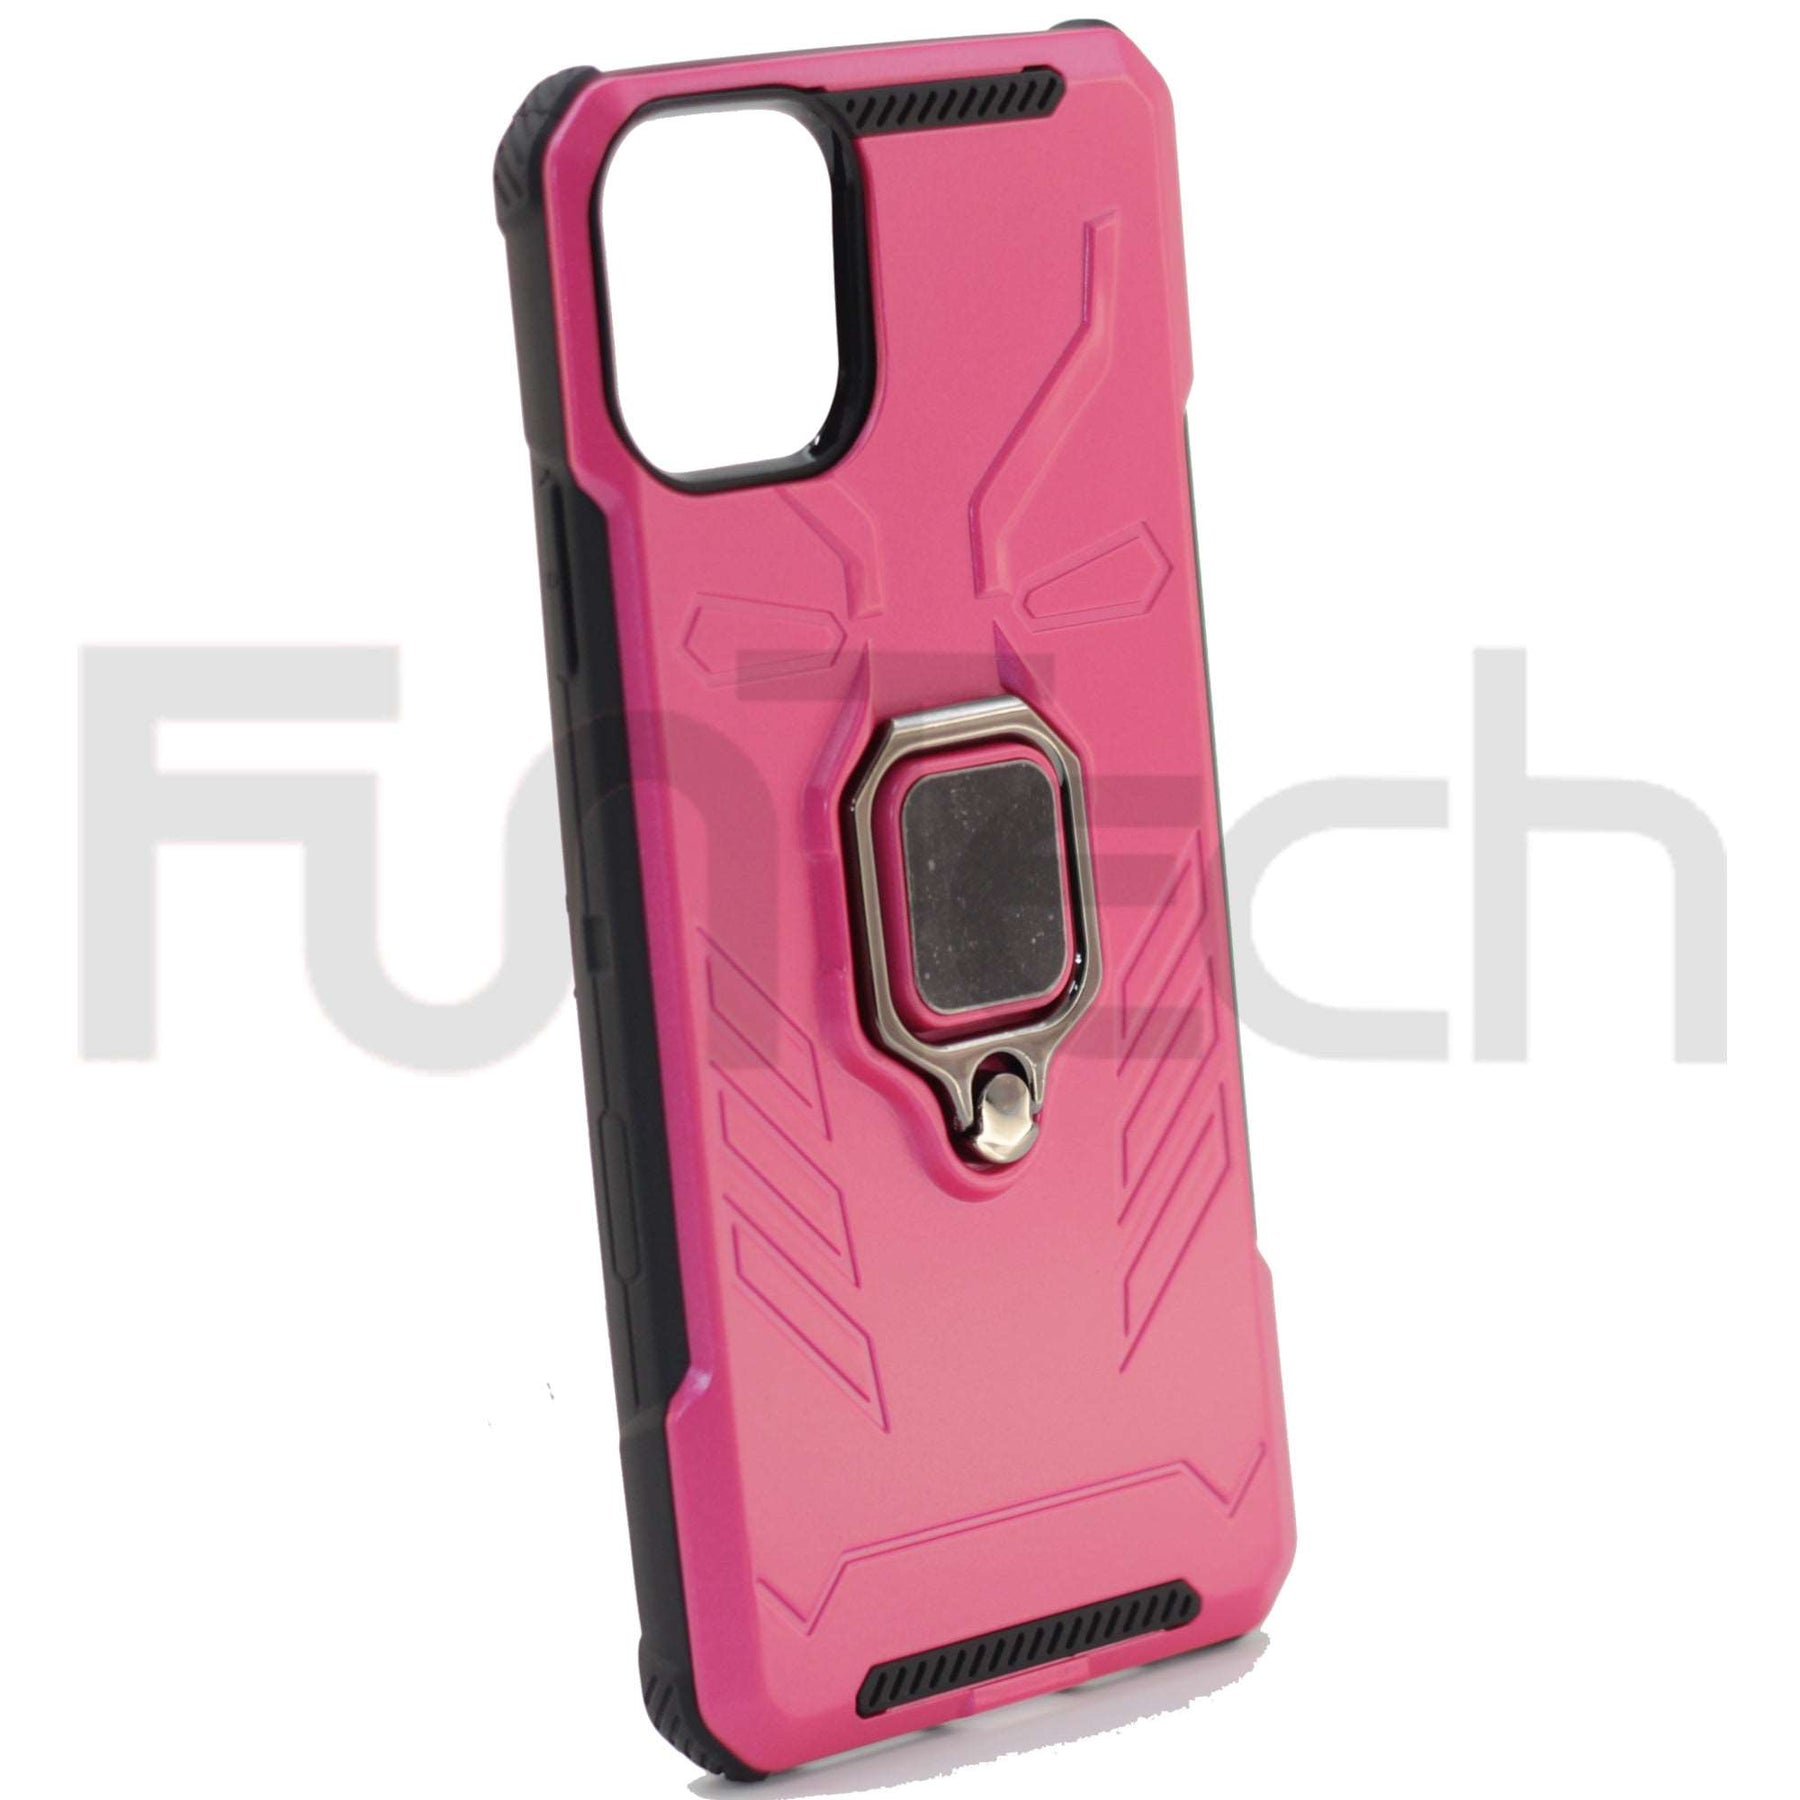 Apple iPhone 11 Pro MAX, Ring Armor Case, Color Pink,